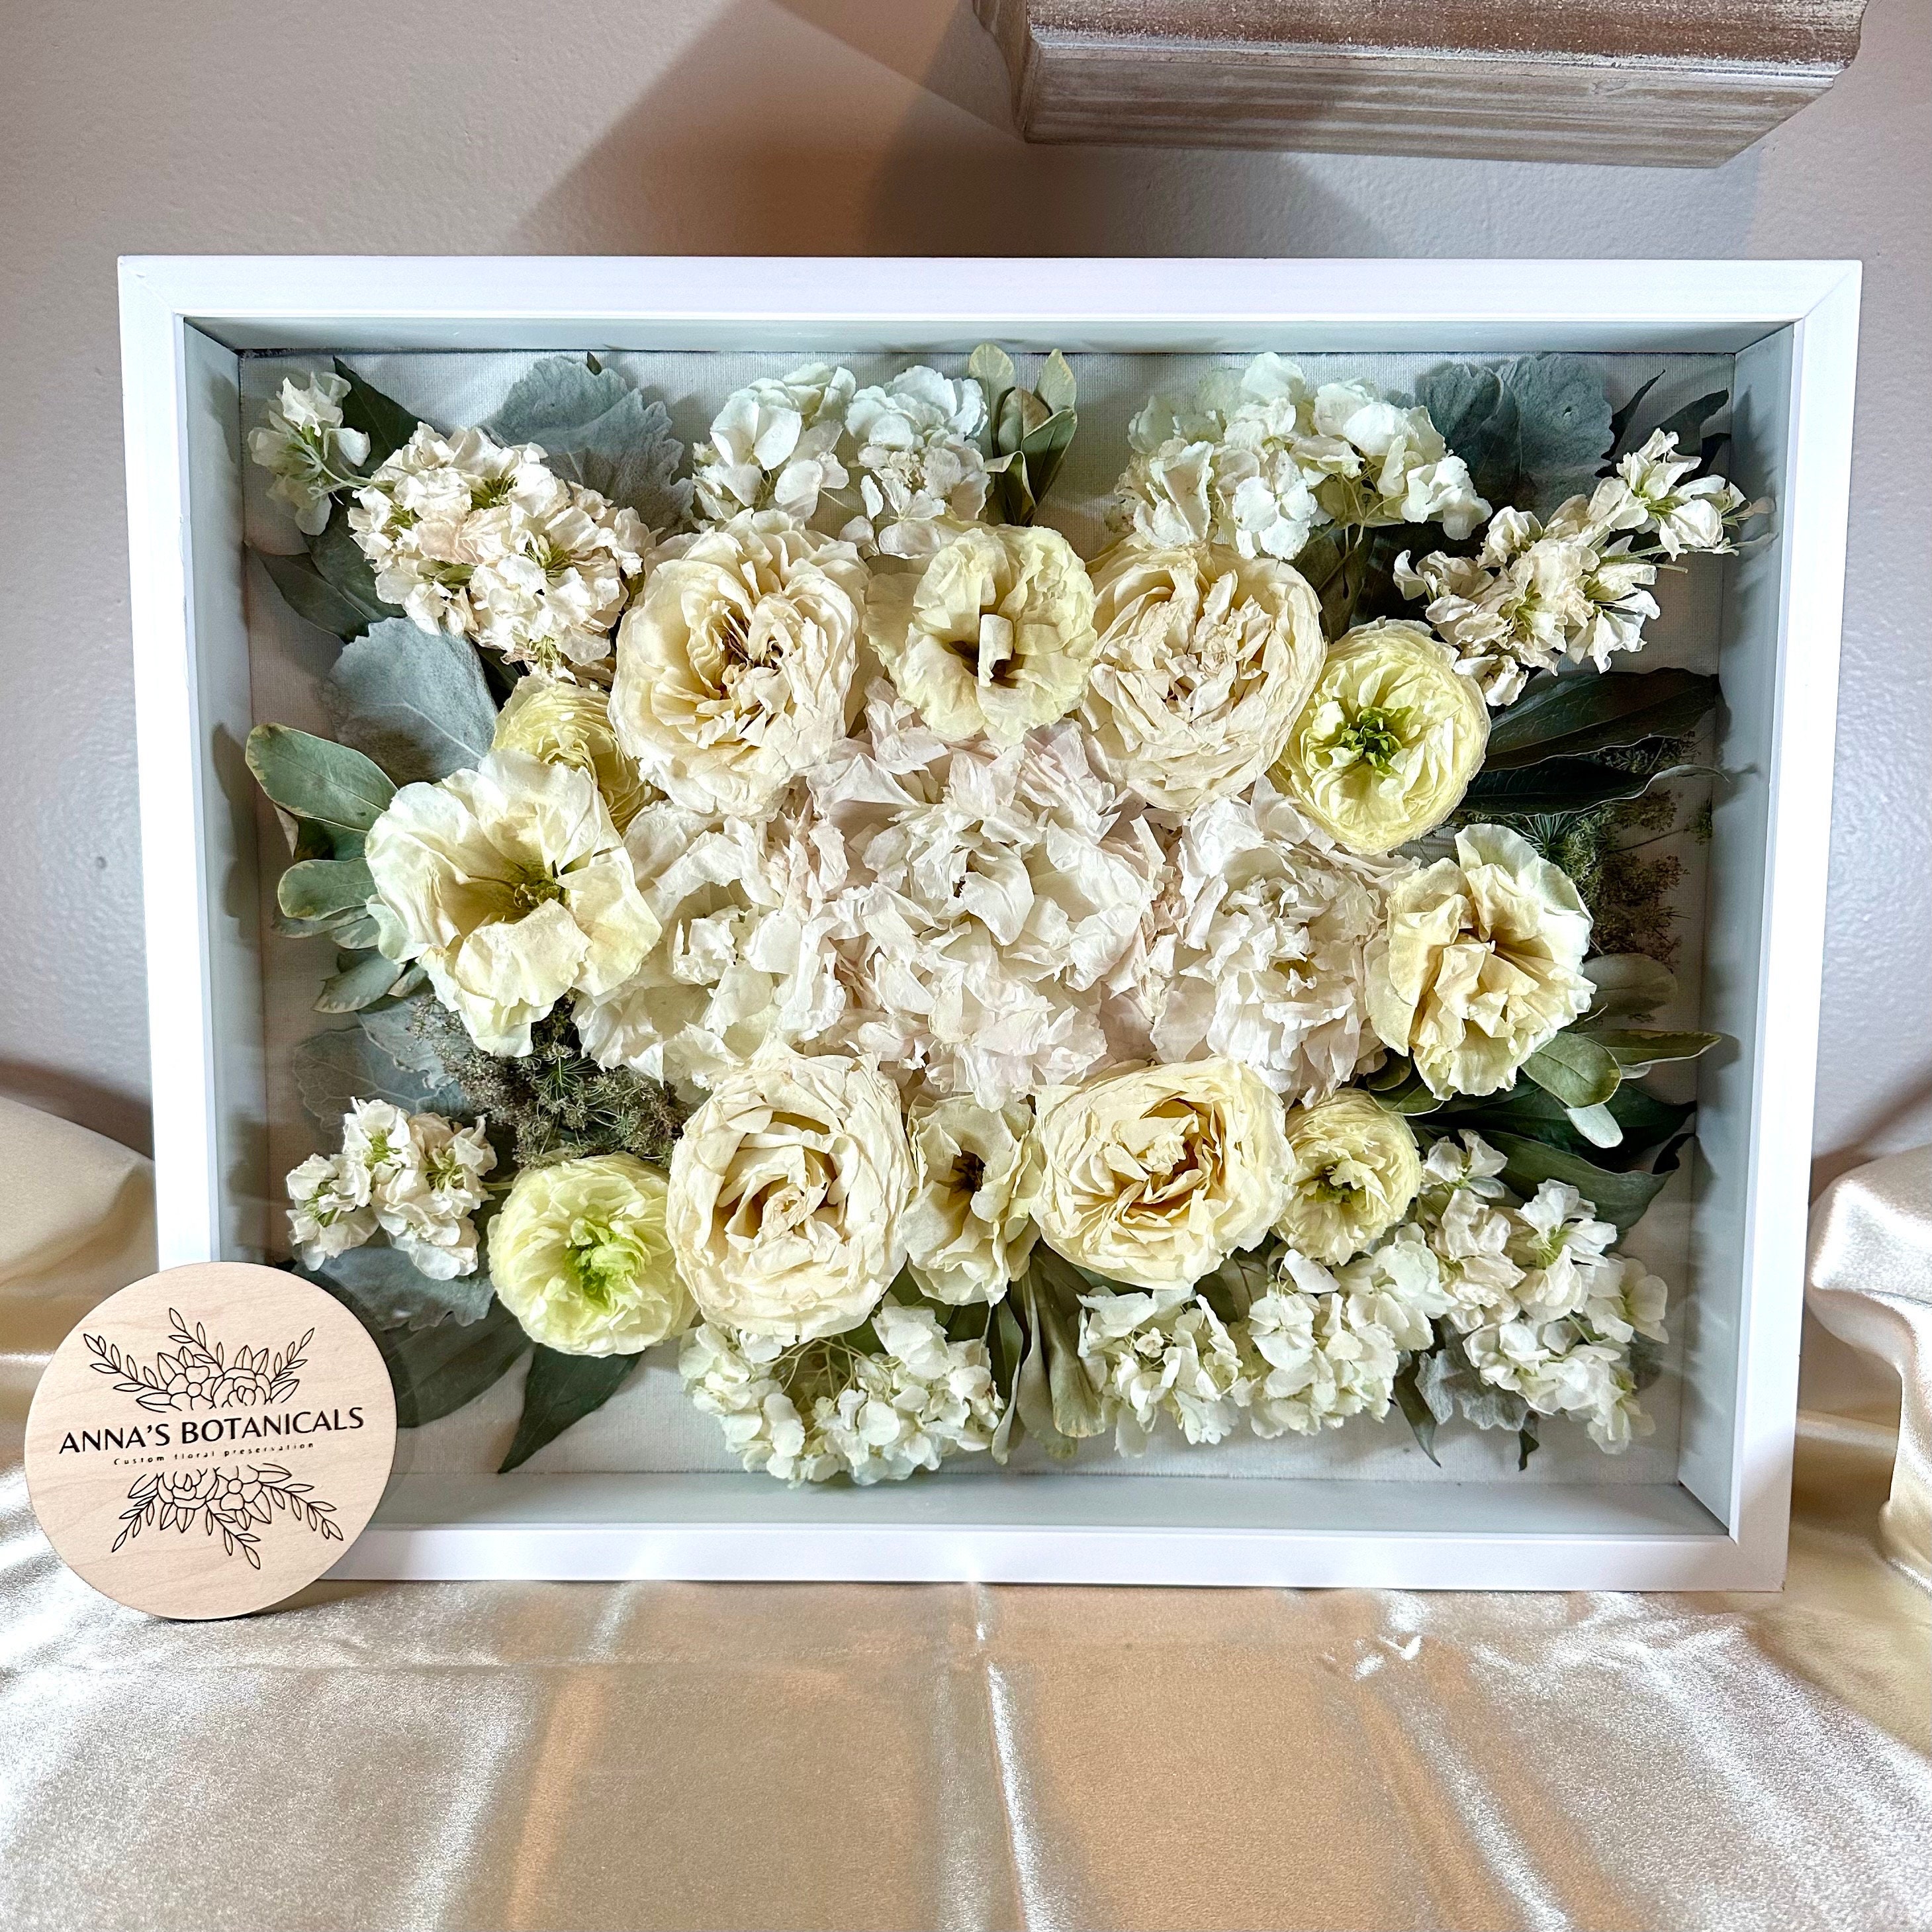 Dried Wildflower Bouquets, Naturally Preserved Flowers, Boho Wedding Decor,  Bridal and Bridesmaid, Bouquets for a Bud Vase, Gifts Under 35 